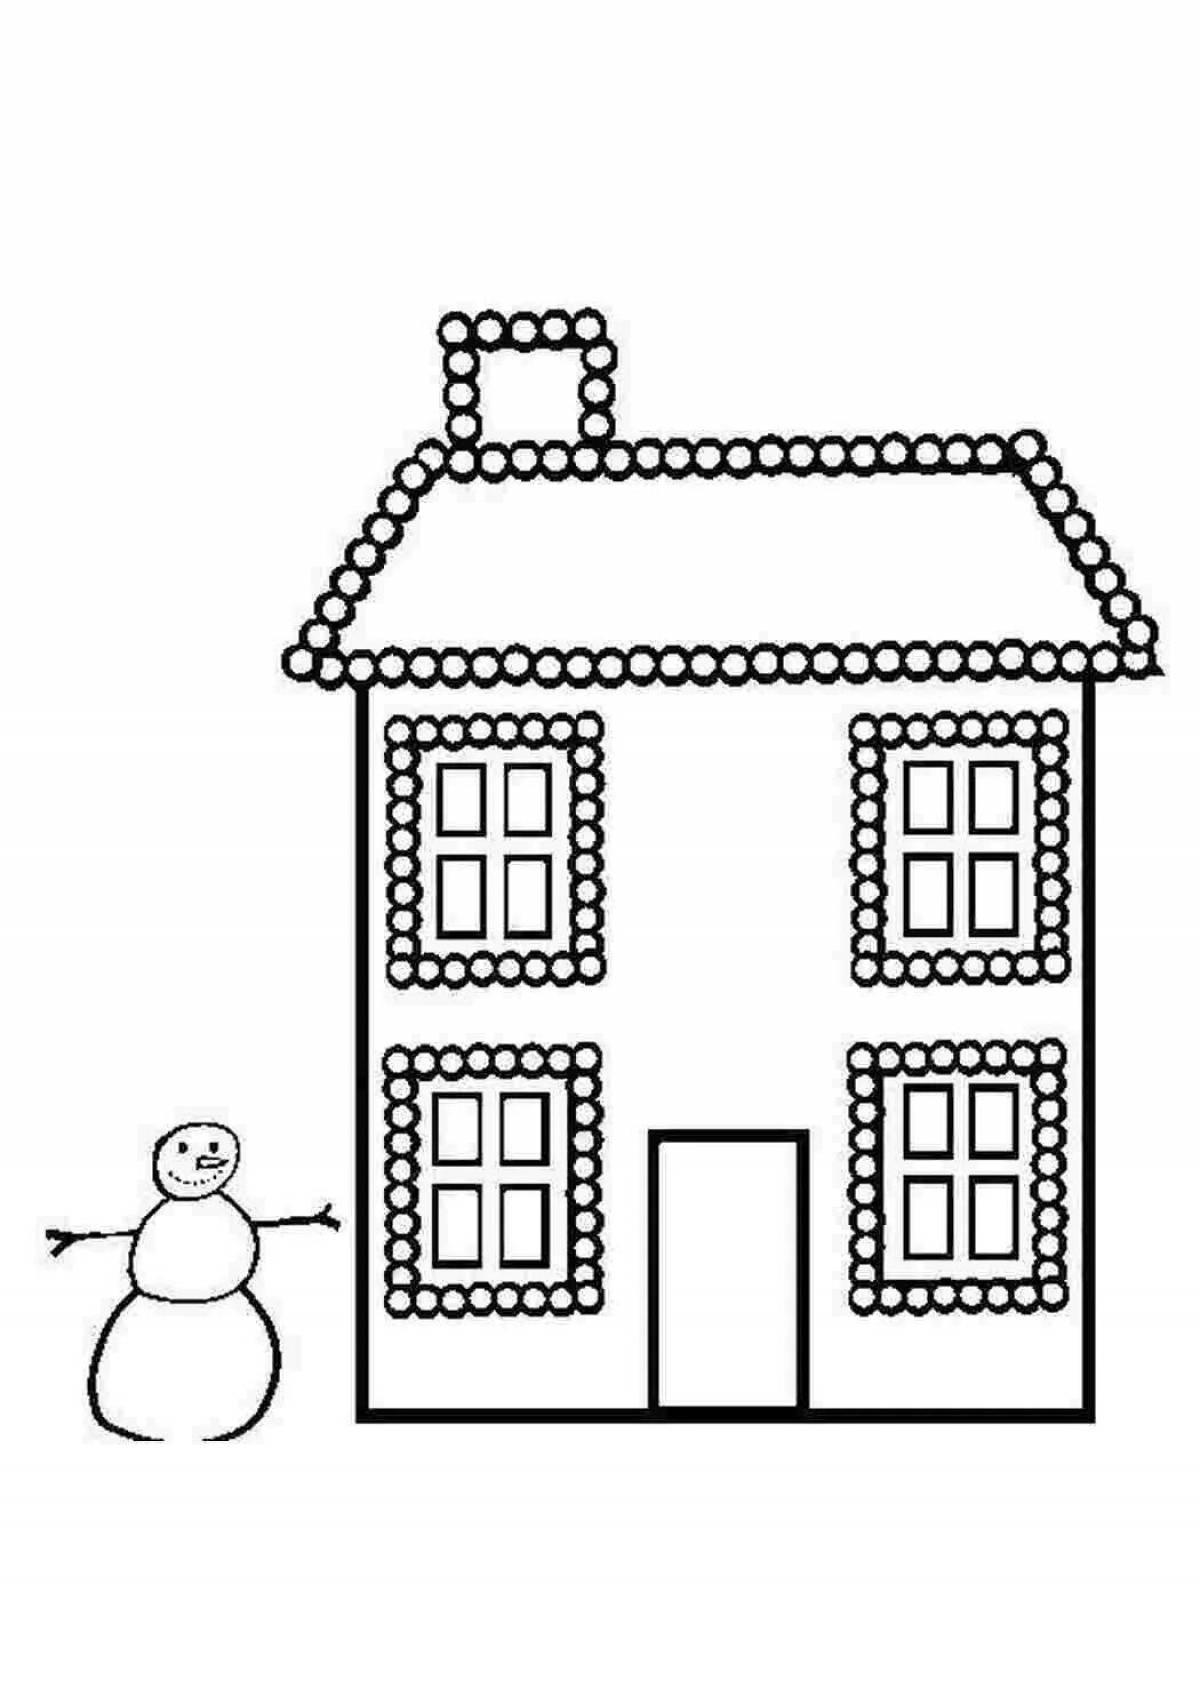 Jolly two-storey house coloring book for children